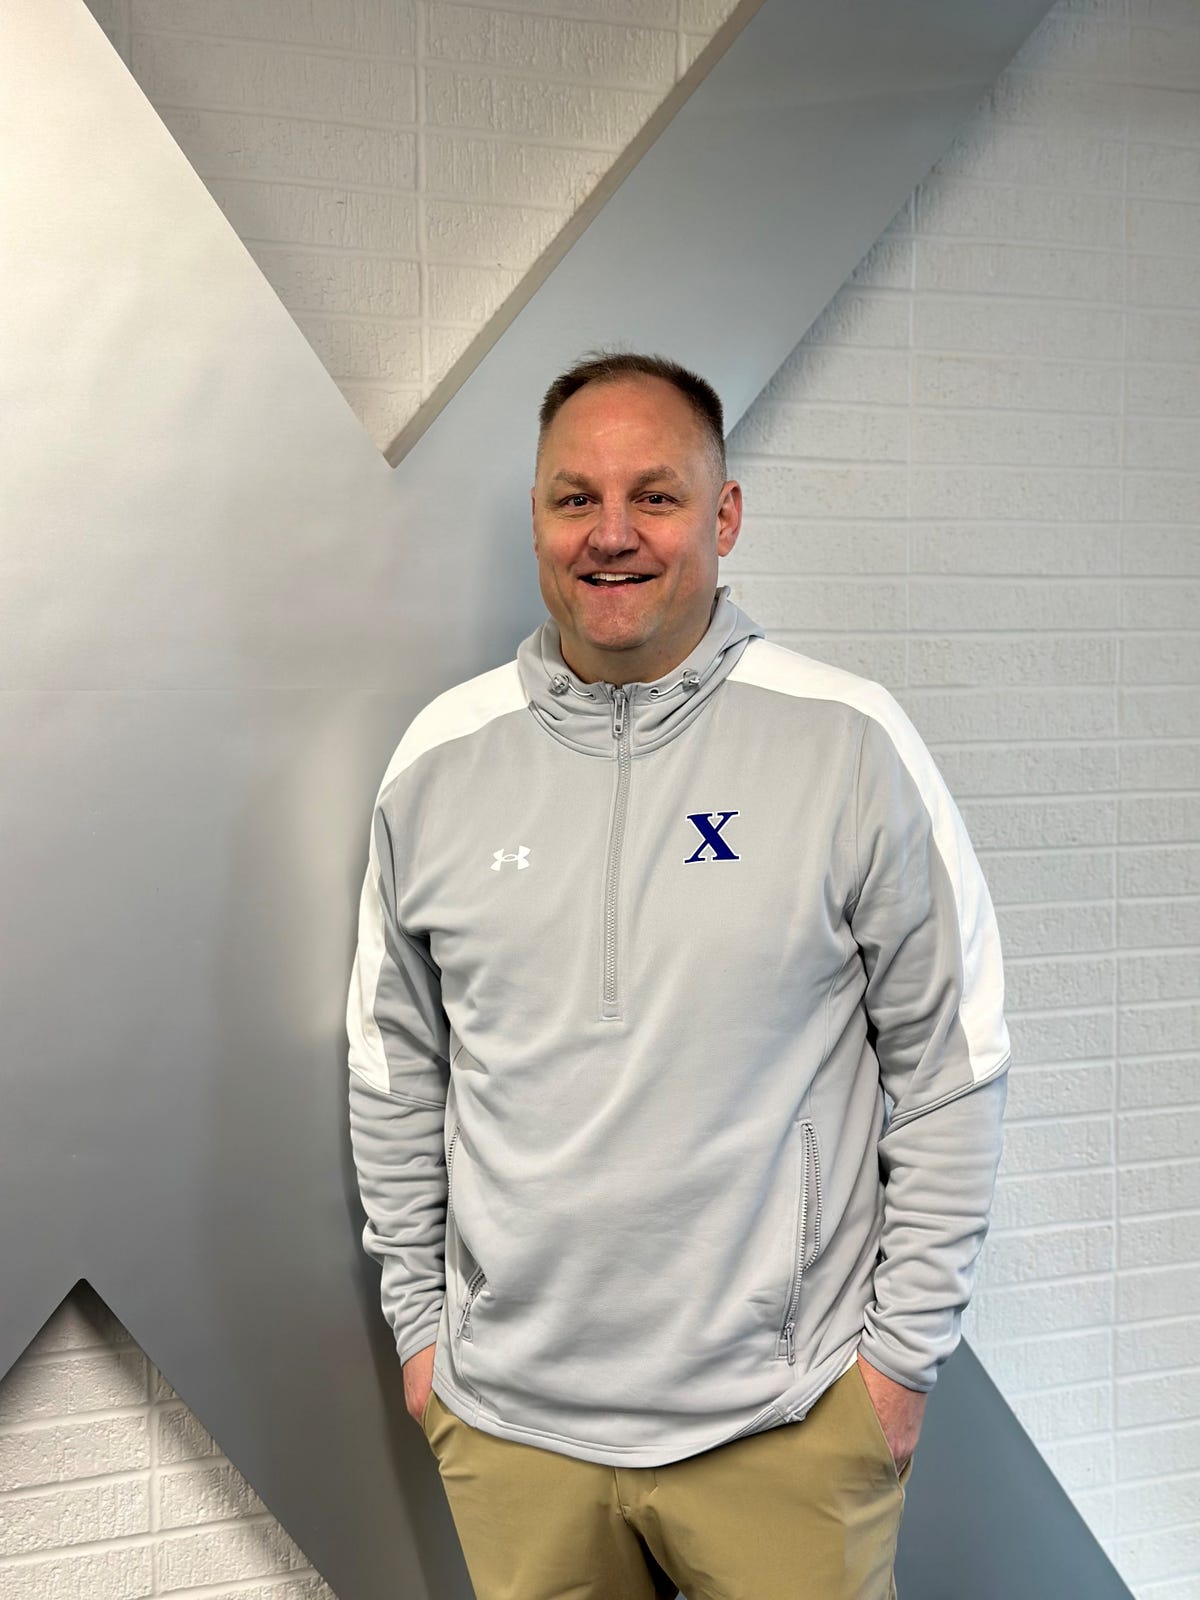 St. Xavier will have new athletic director taking over in July